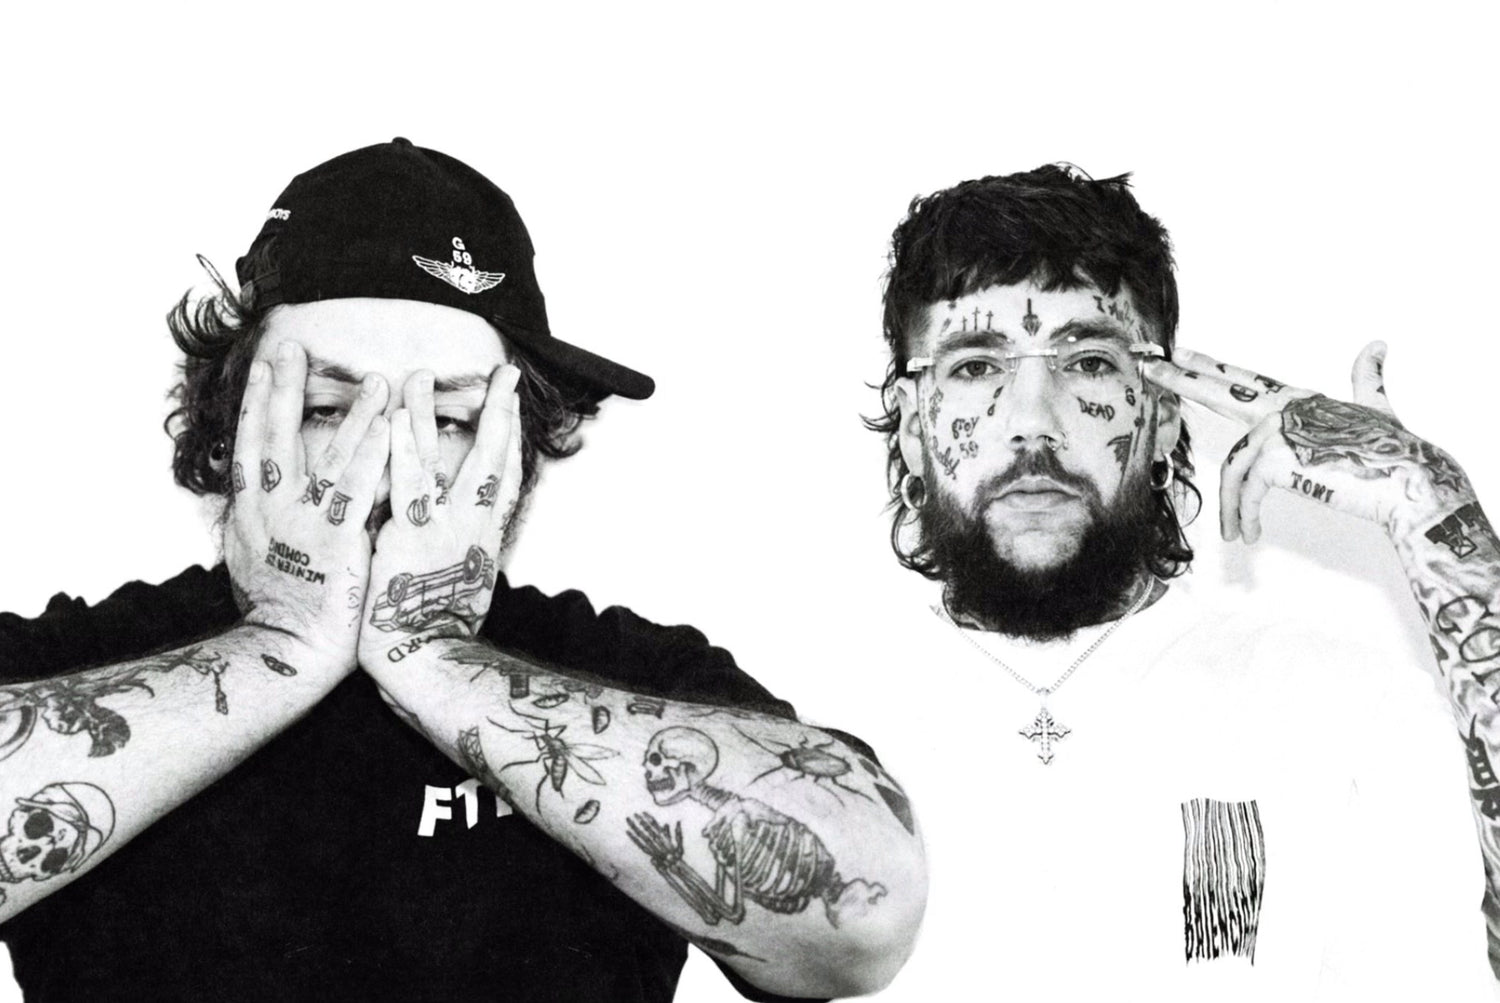 $UICIDEBOY$ REVEAL FIFTH INSTALLMENT IN THE ‘I NO LONGER FEAR THE RAZOR GUARDING MY HEEL’ EP SERIES